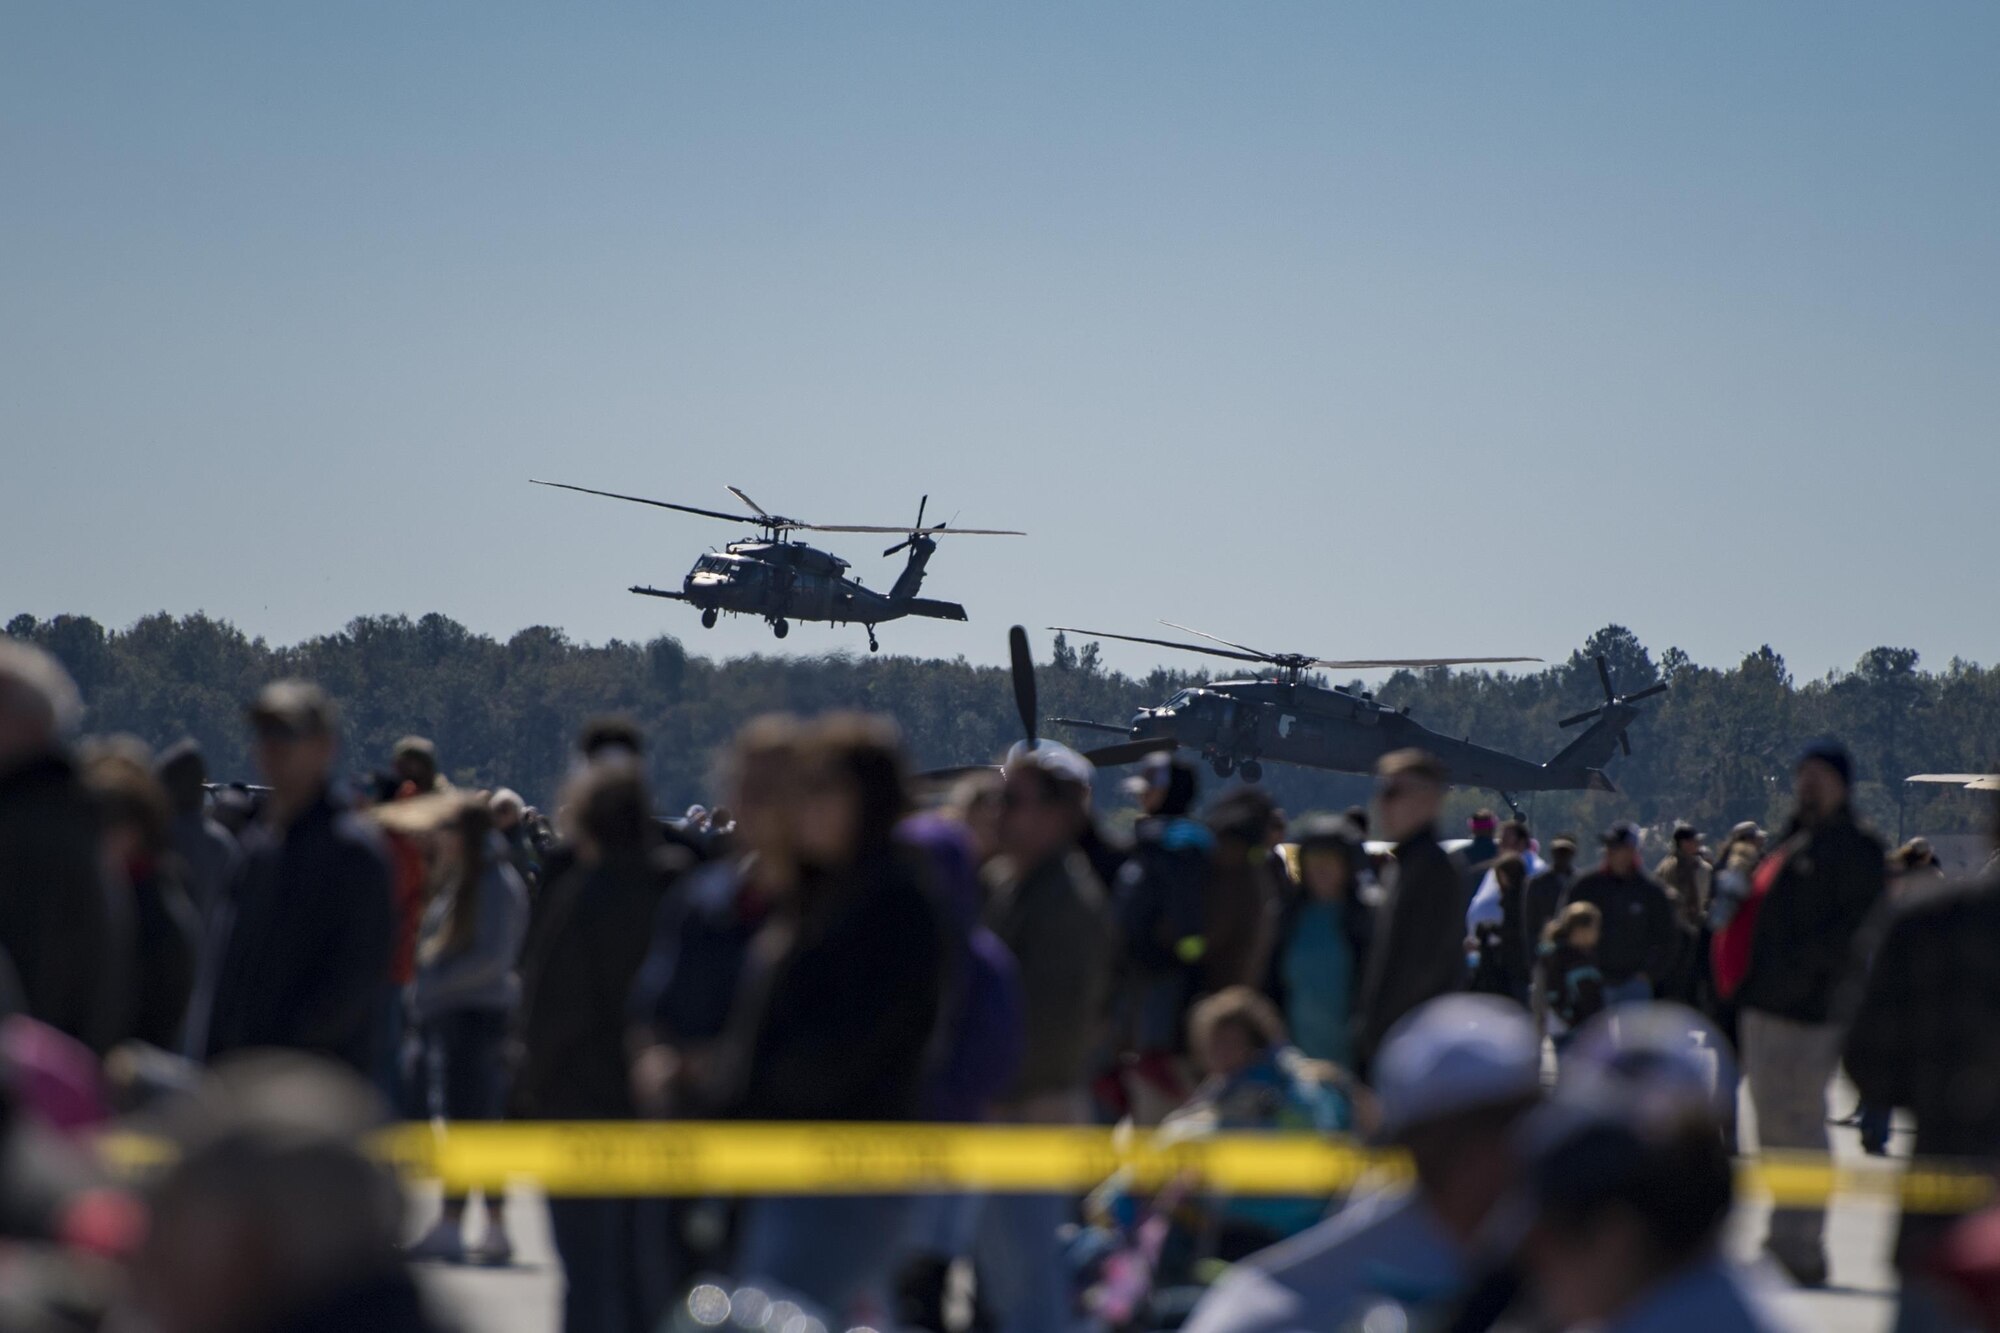 Spectators watch in awe as an HH-60G Pavehawk land during the Thunder Over South Georgia Air Show, Oct. 29, 2017, at Moody Air Force Base, Ga. The open house is an opportunity for Moody to thank the local community for all its support, and exhibit air power. (U.S. Air Force photo by Staff Sgt, Eric Summers Jr.)